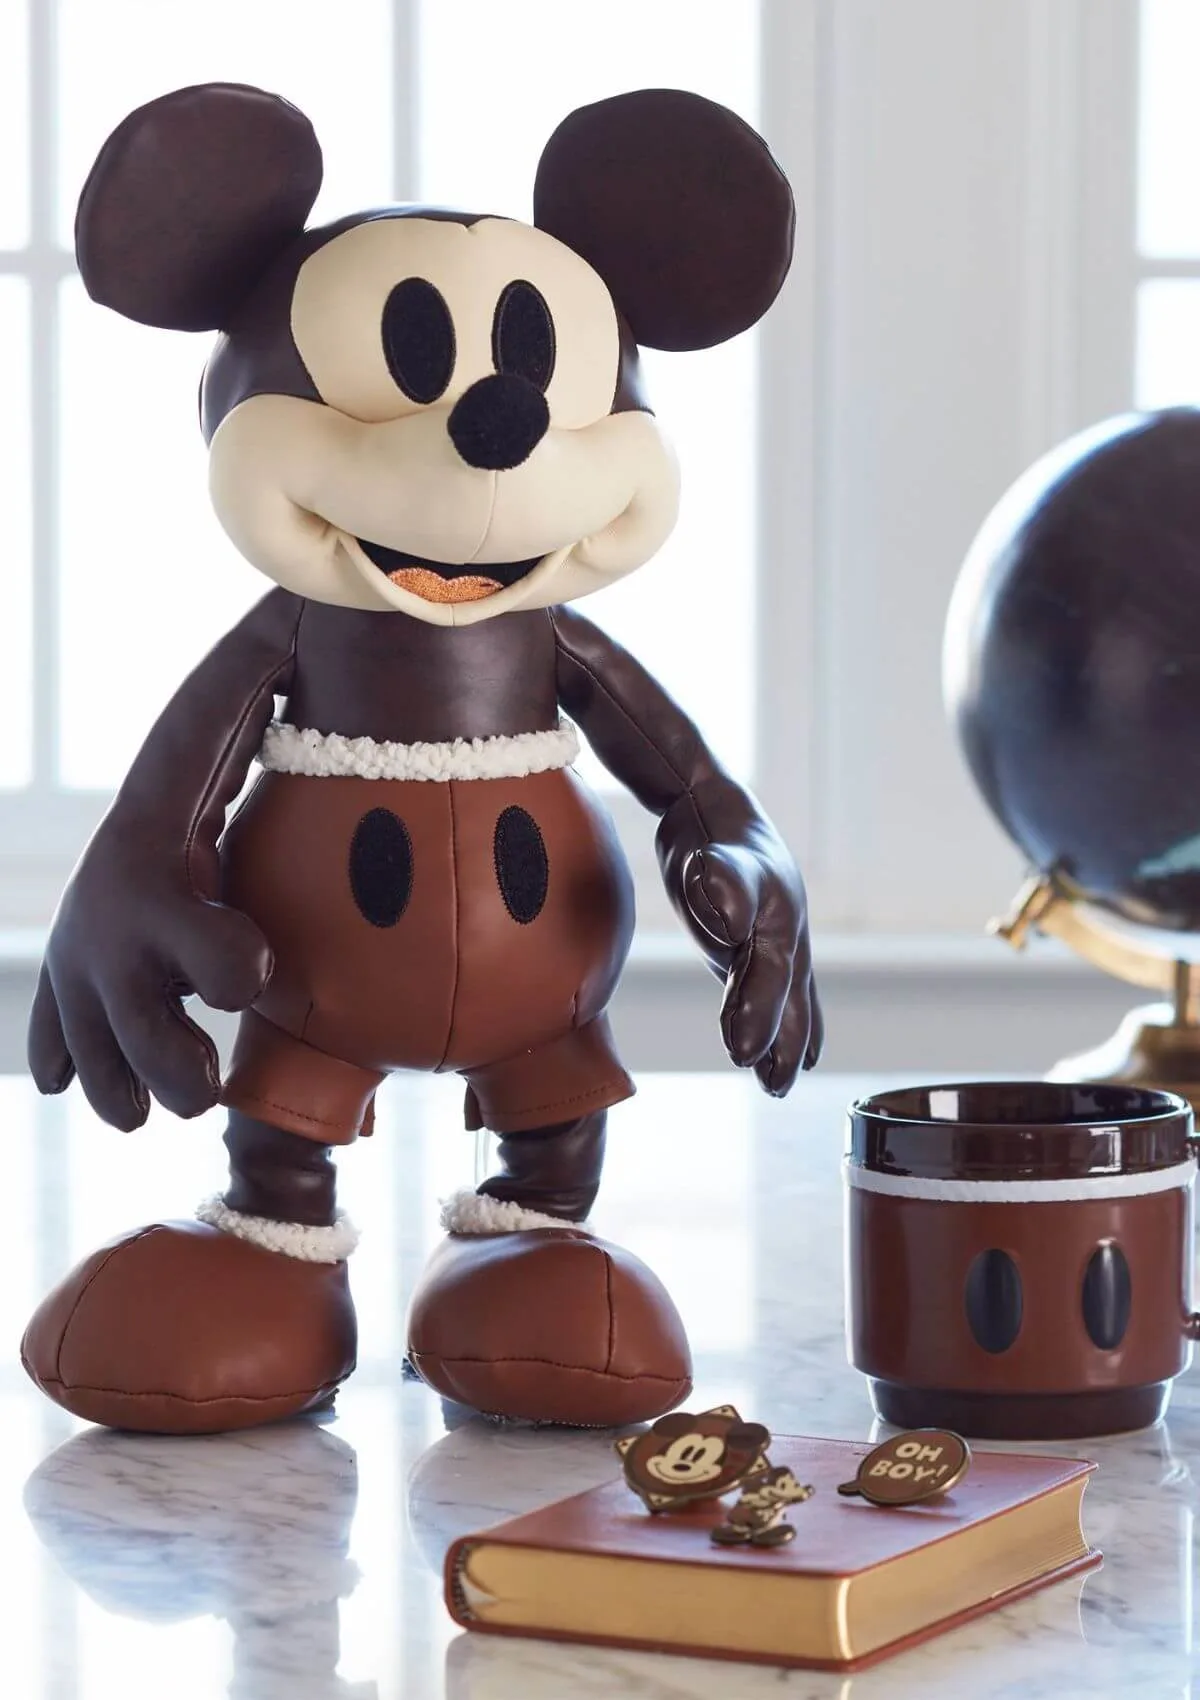 Disney merchandise makes for magical souvenirs from the USA